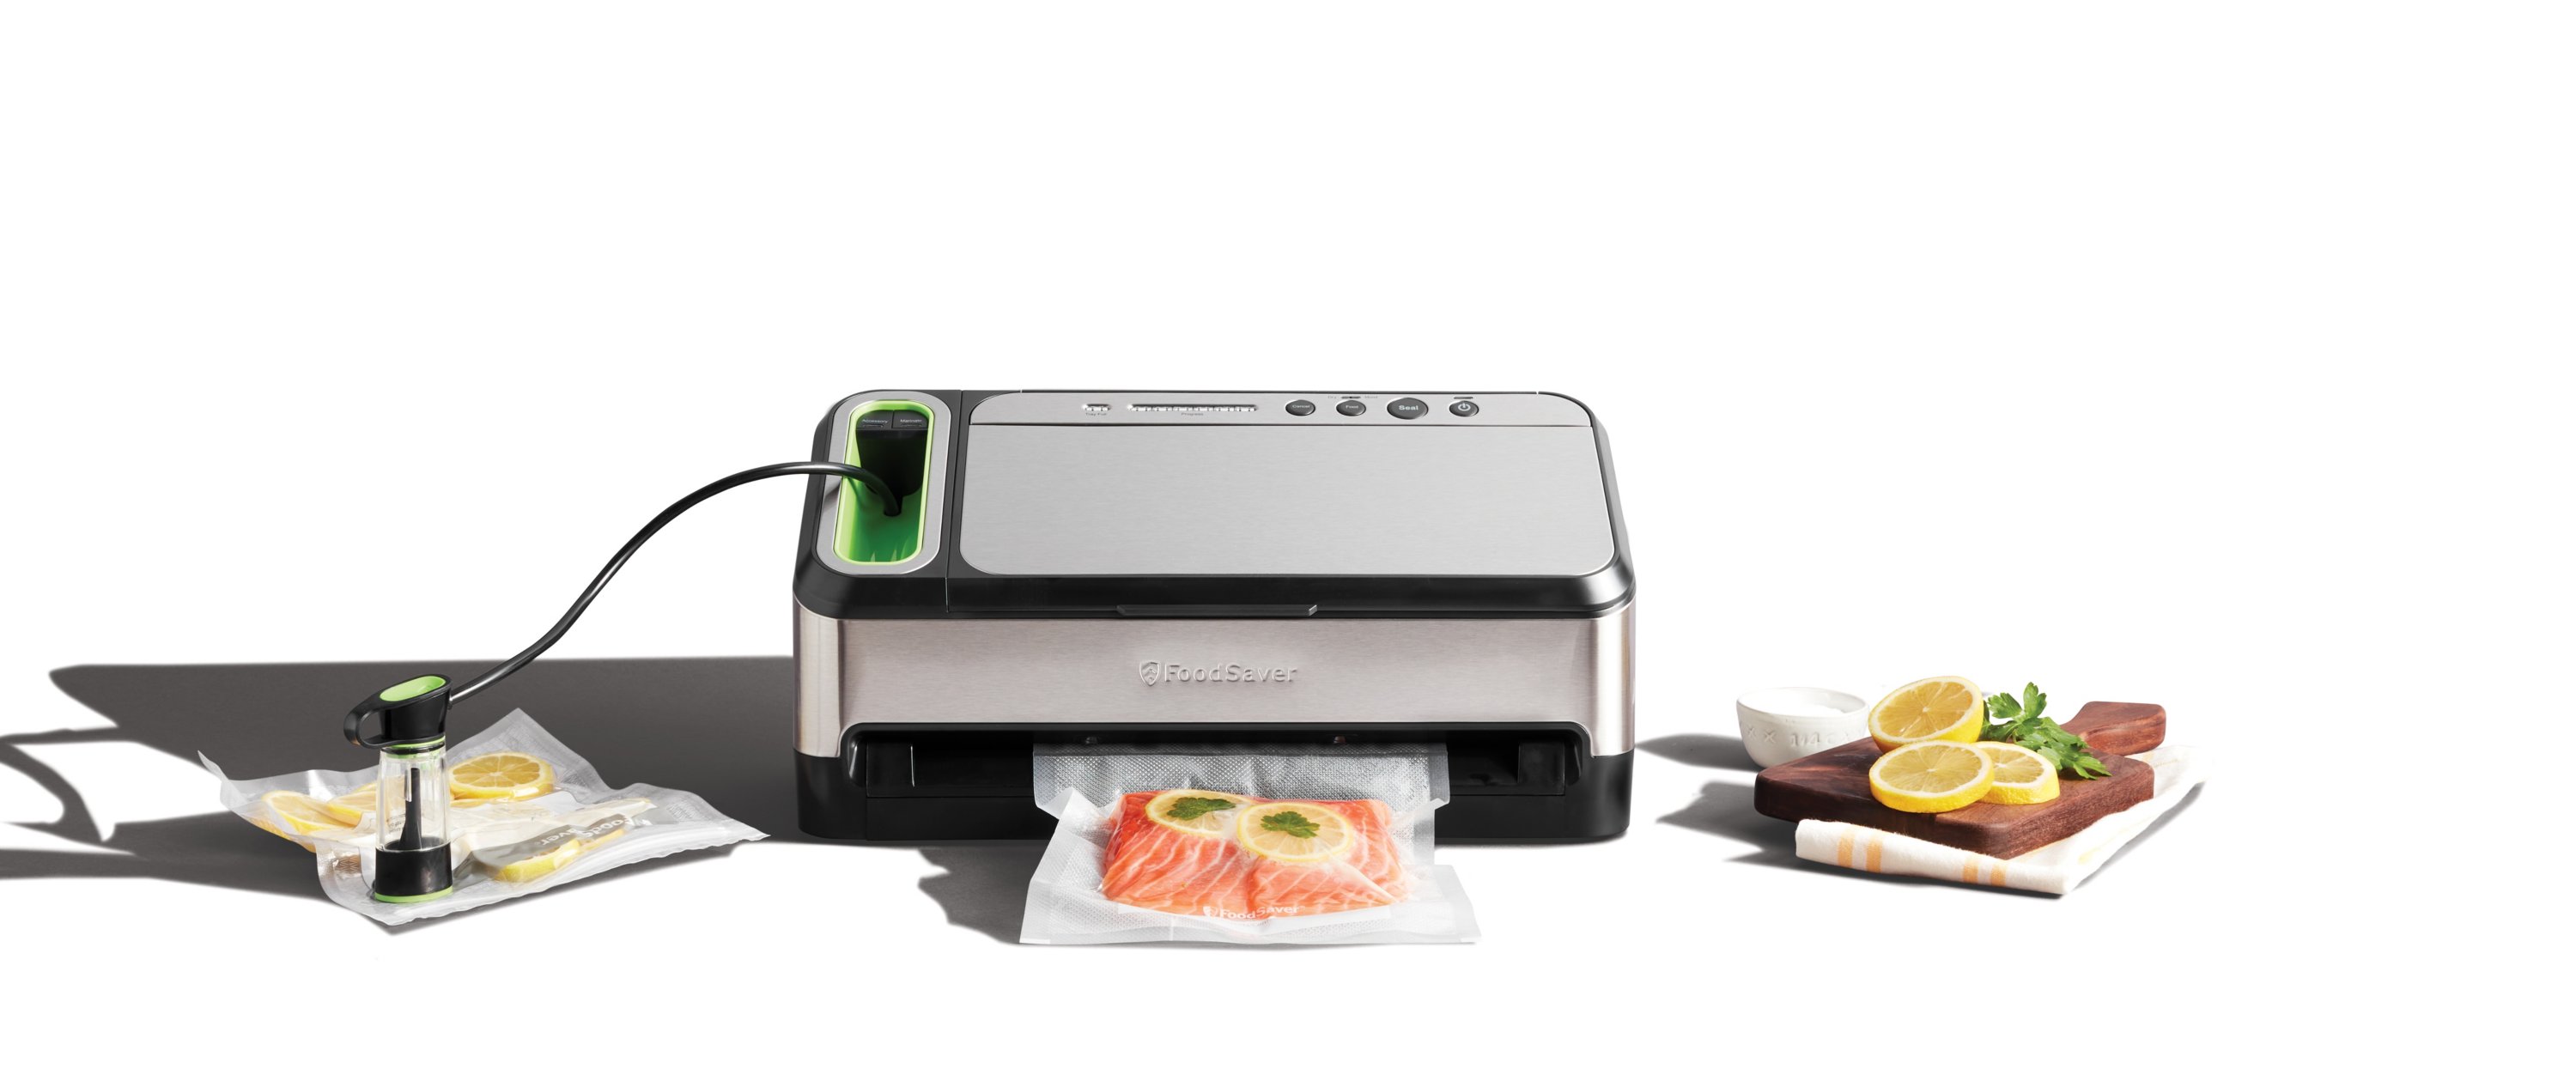 FoodSaver 2-in-1 Vacuum Sealing System with Starter Kit, 4800 Series, v4840  & FoodSaver 8 & 11 Rolls with unique multi layer construction, BPA free